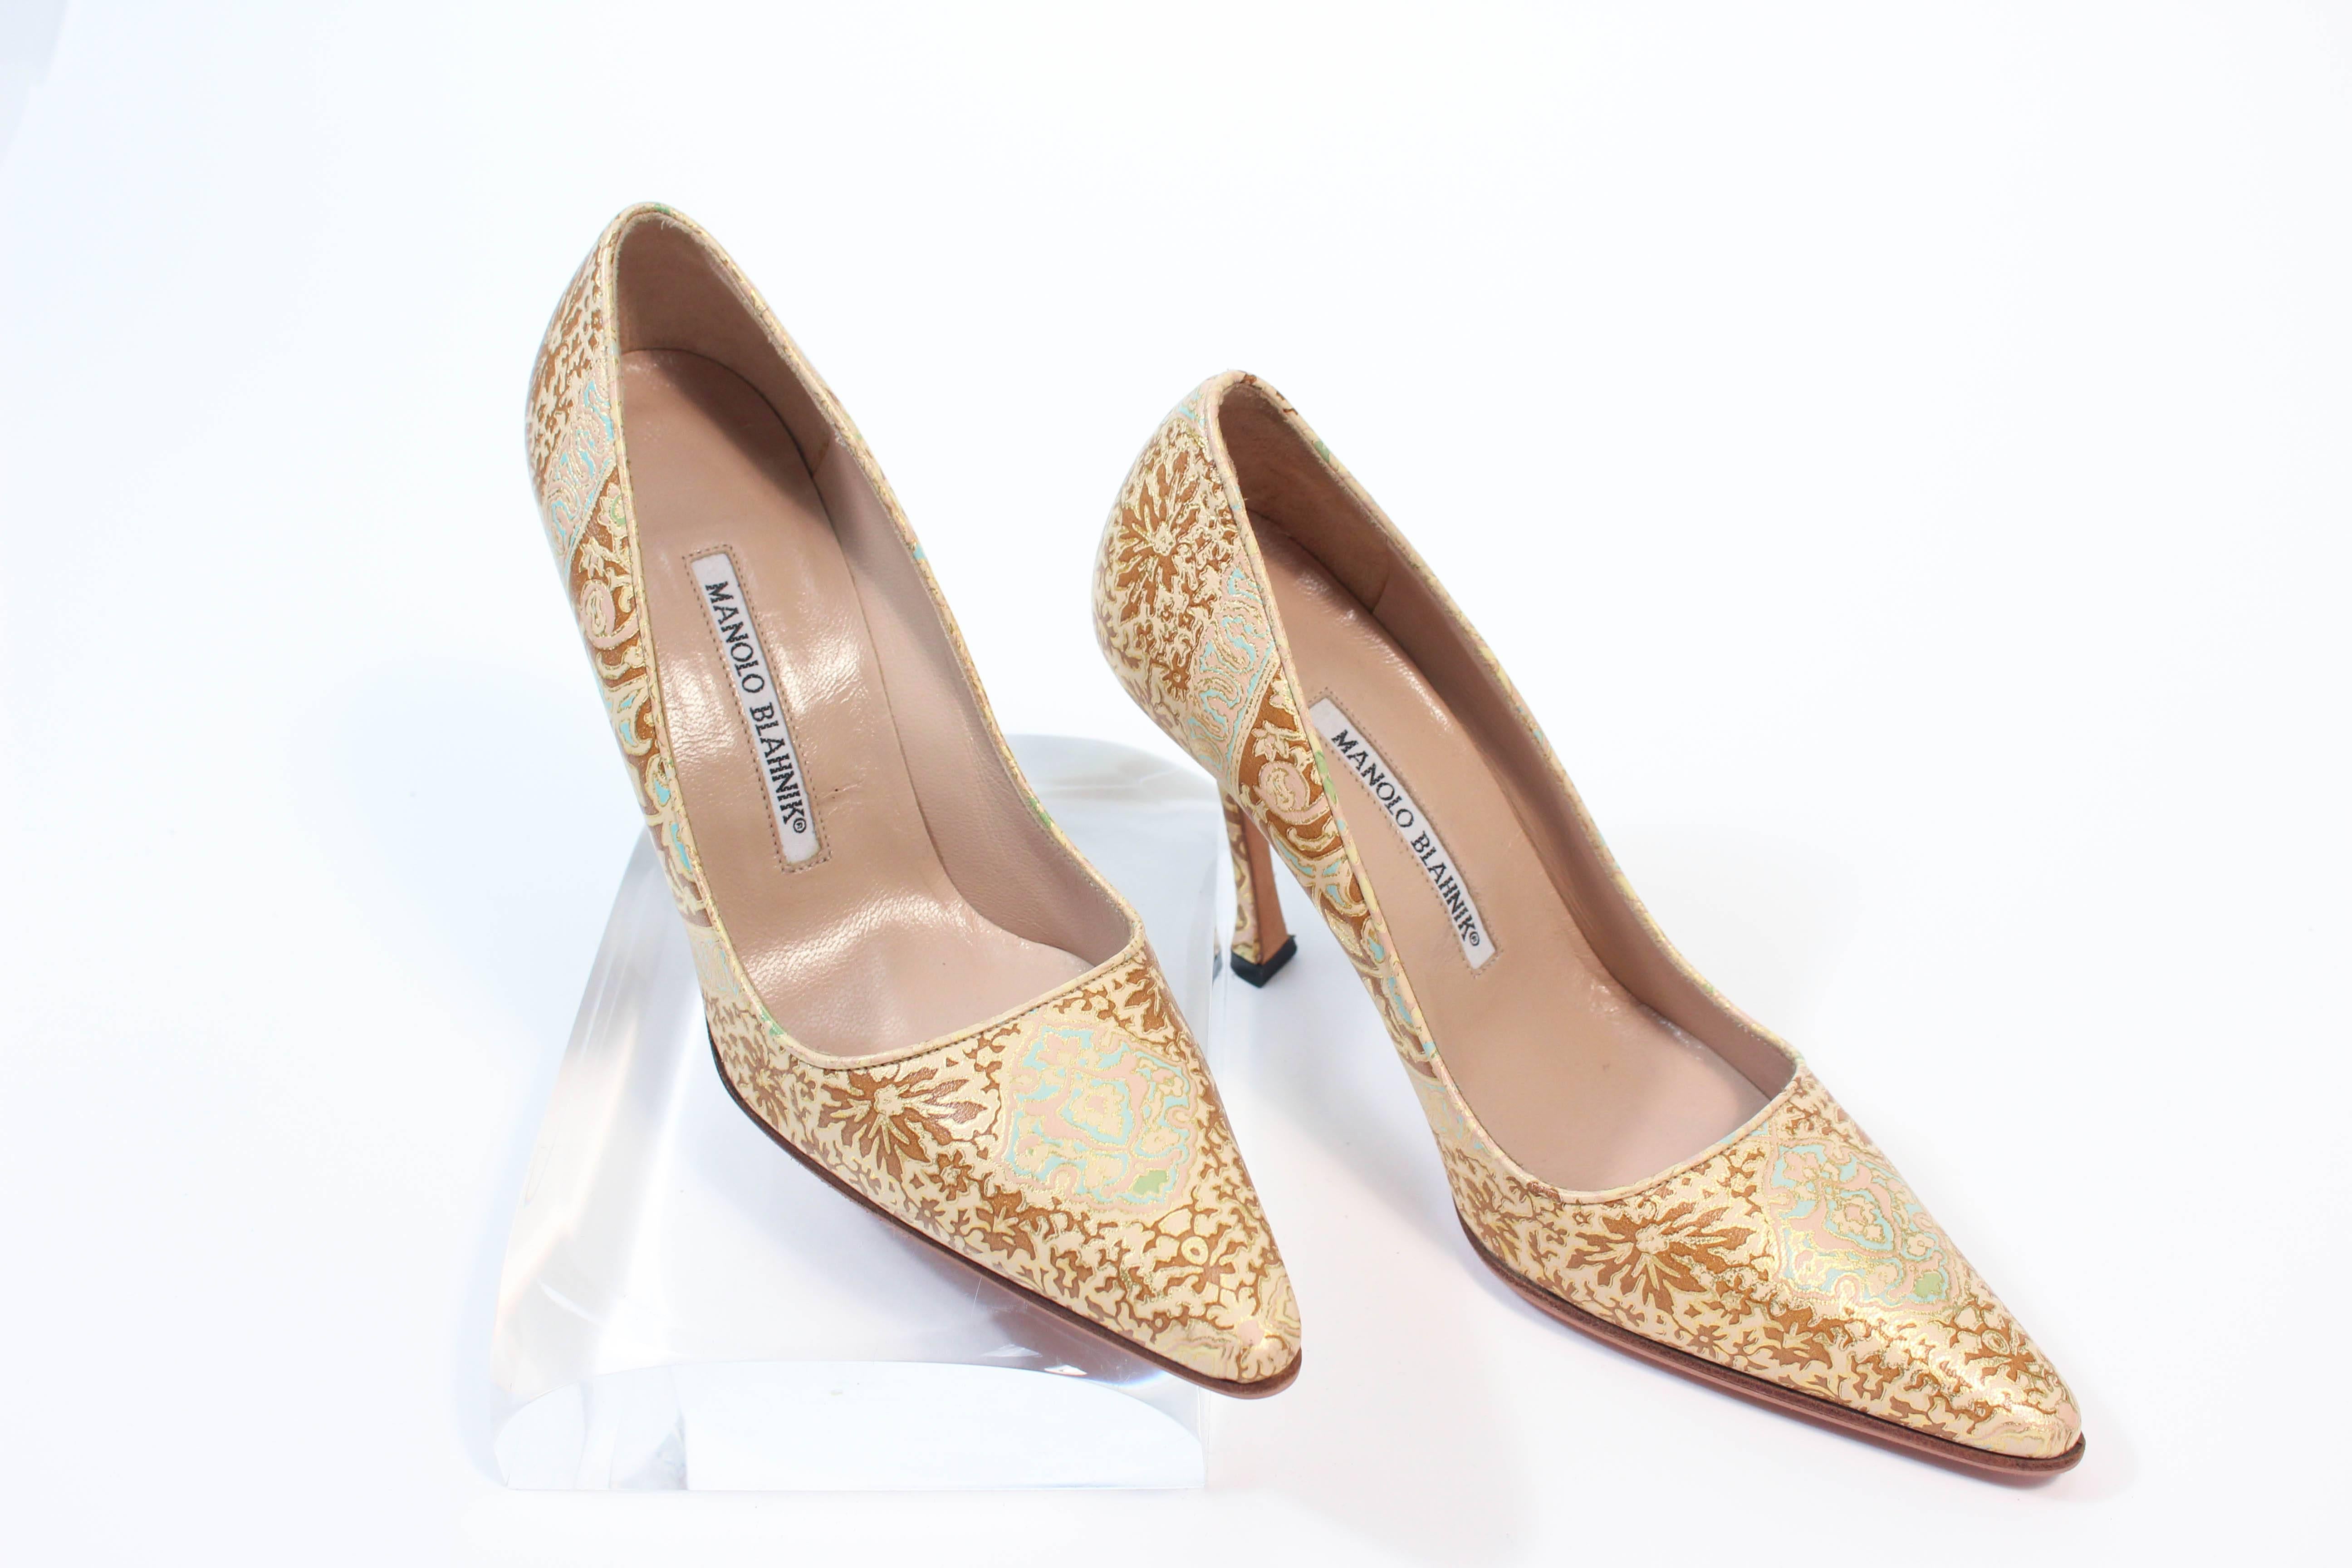 These Manolo Blahnik high heels are composed of a gold brocade leather with white and turquoise accents. Features a pointed toe with stiletto heel . In excellent unused condition. 

**Please cross-reference measurements for personal accuracy. Size